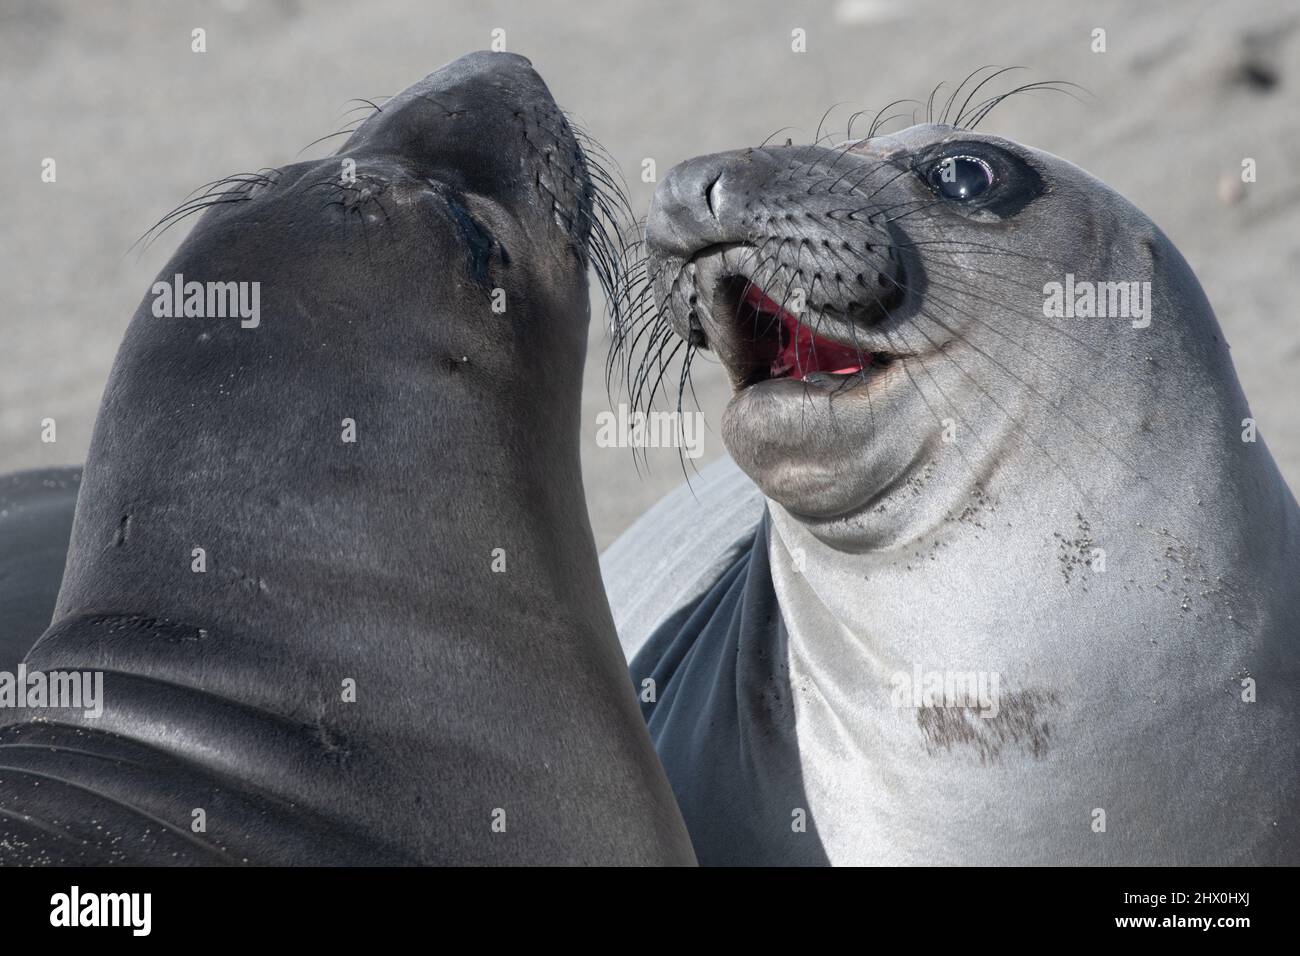 Two northern elephant seal (Mirounga angustirostris) pups fighting, good practice for when they are older and must compete over beach space. Stock Photo